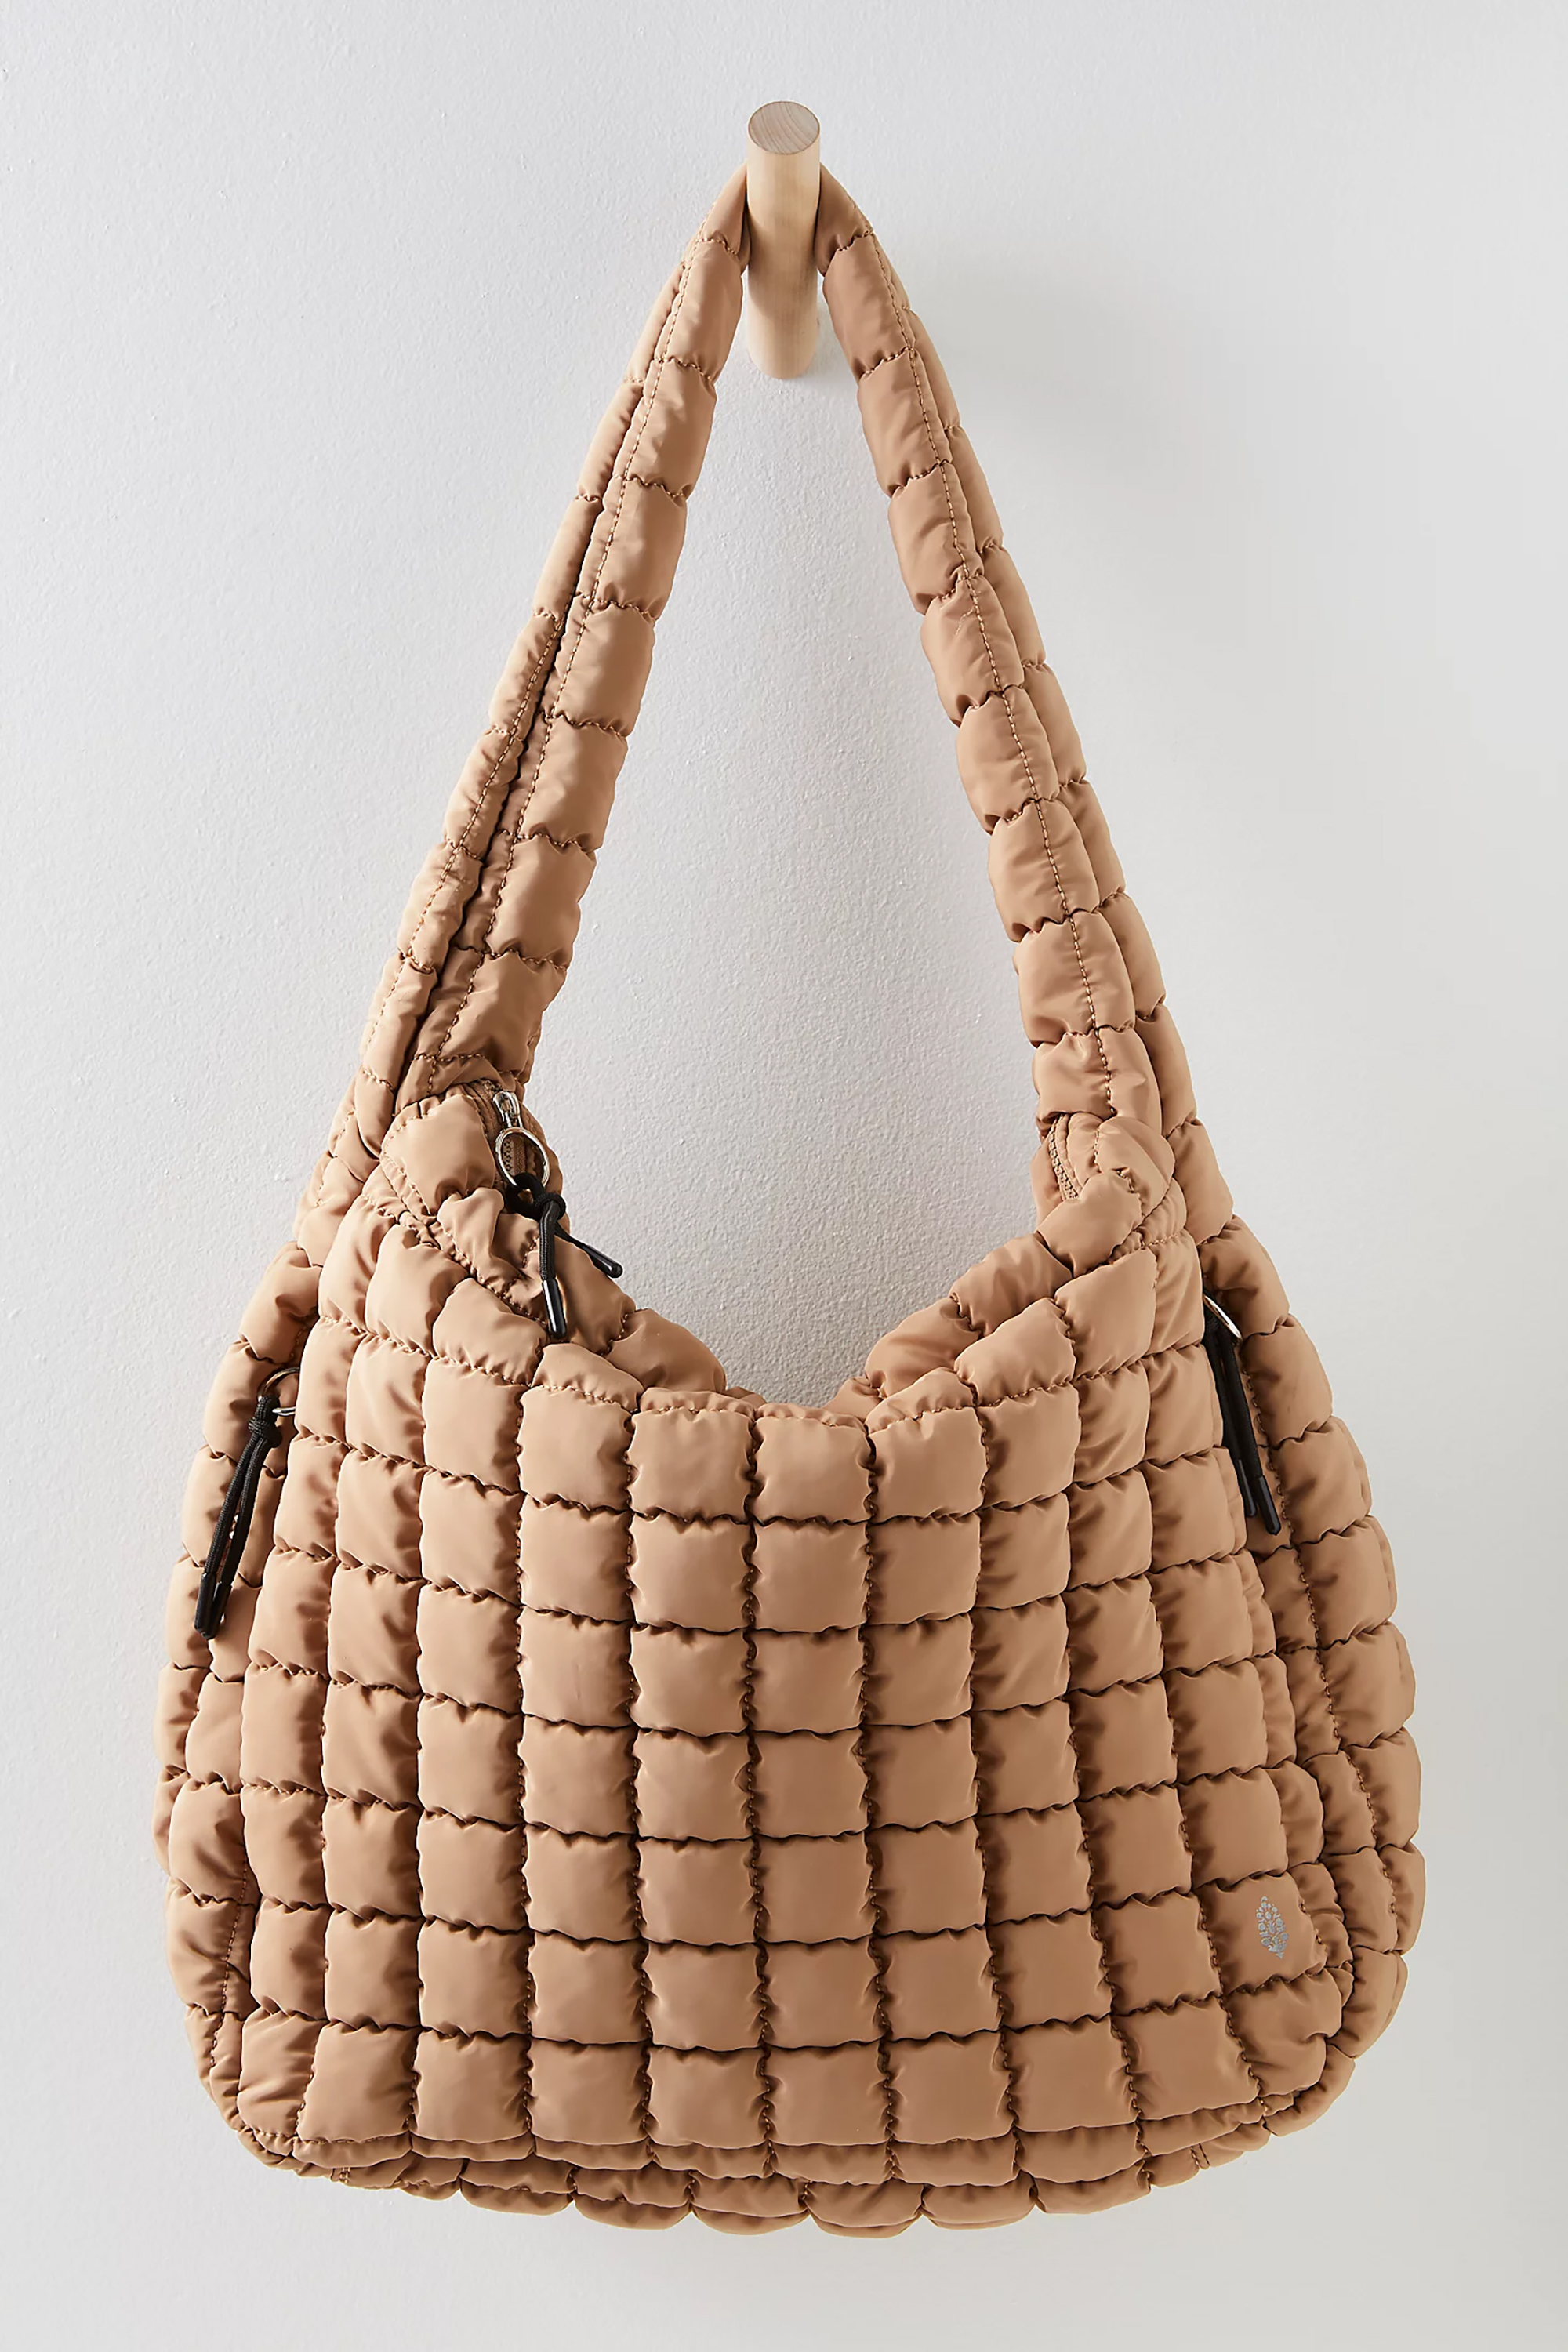 Free People quilted bag